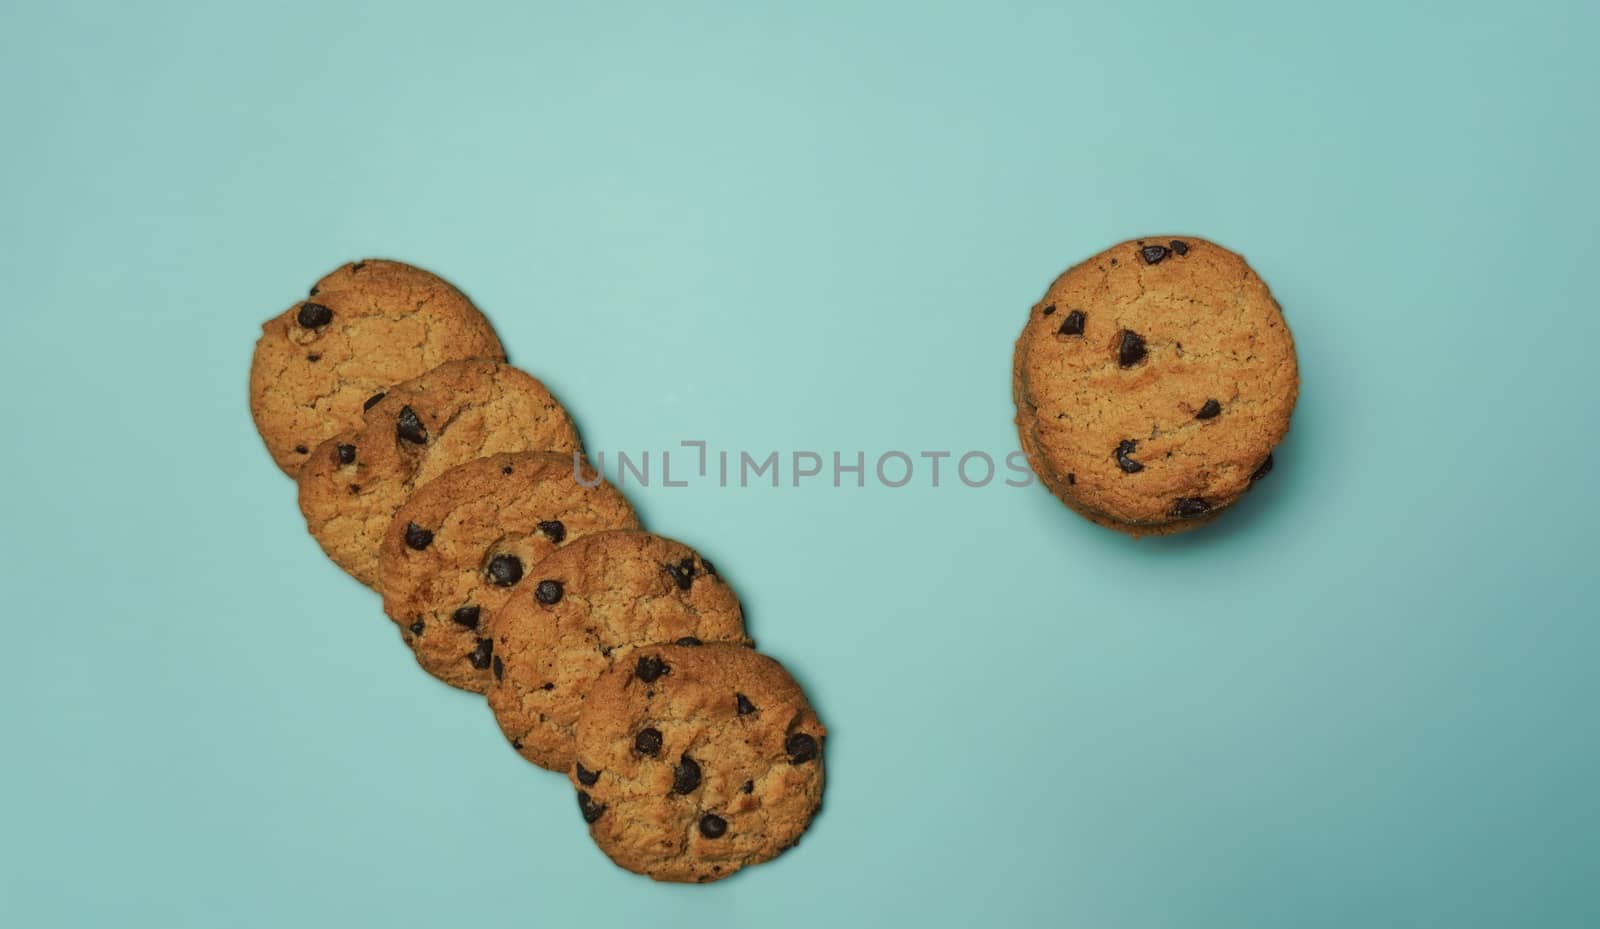 Chocolate Chip Cookies on blue background.